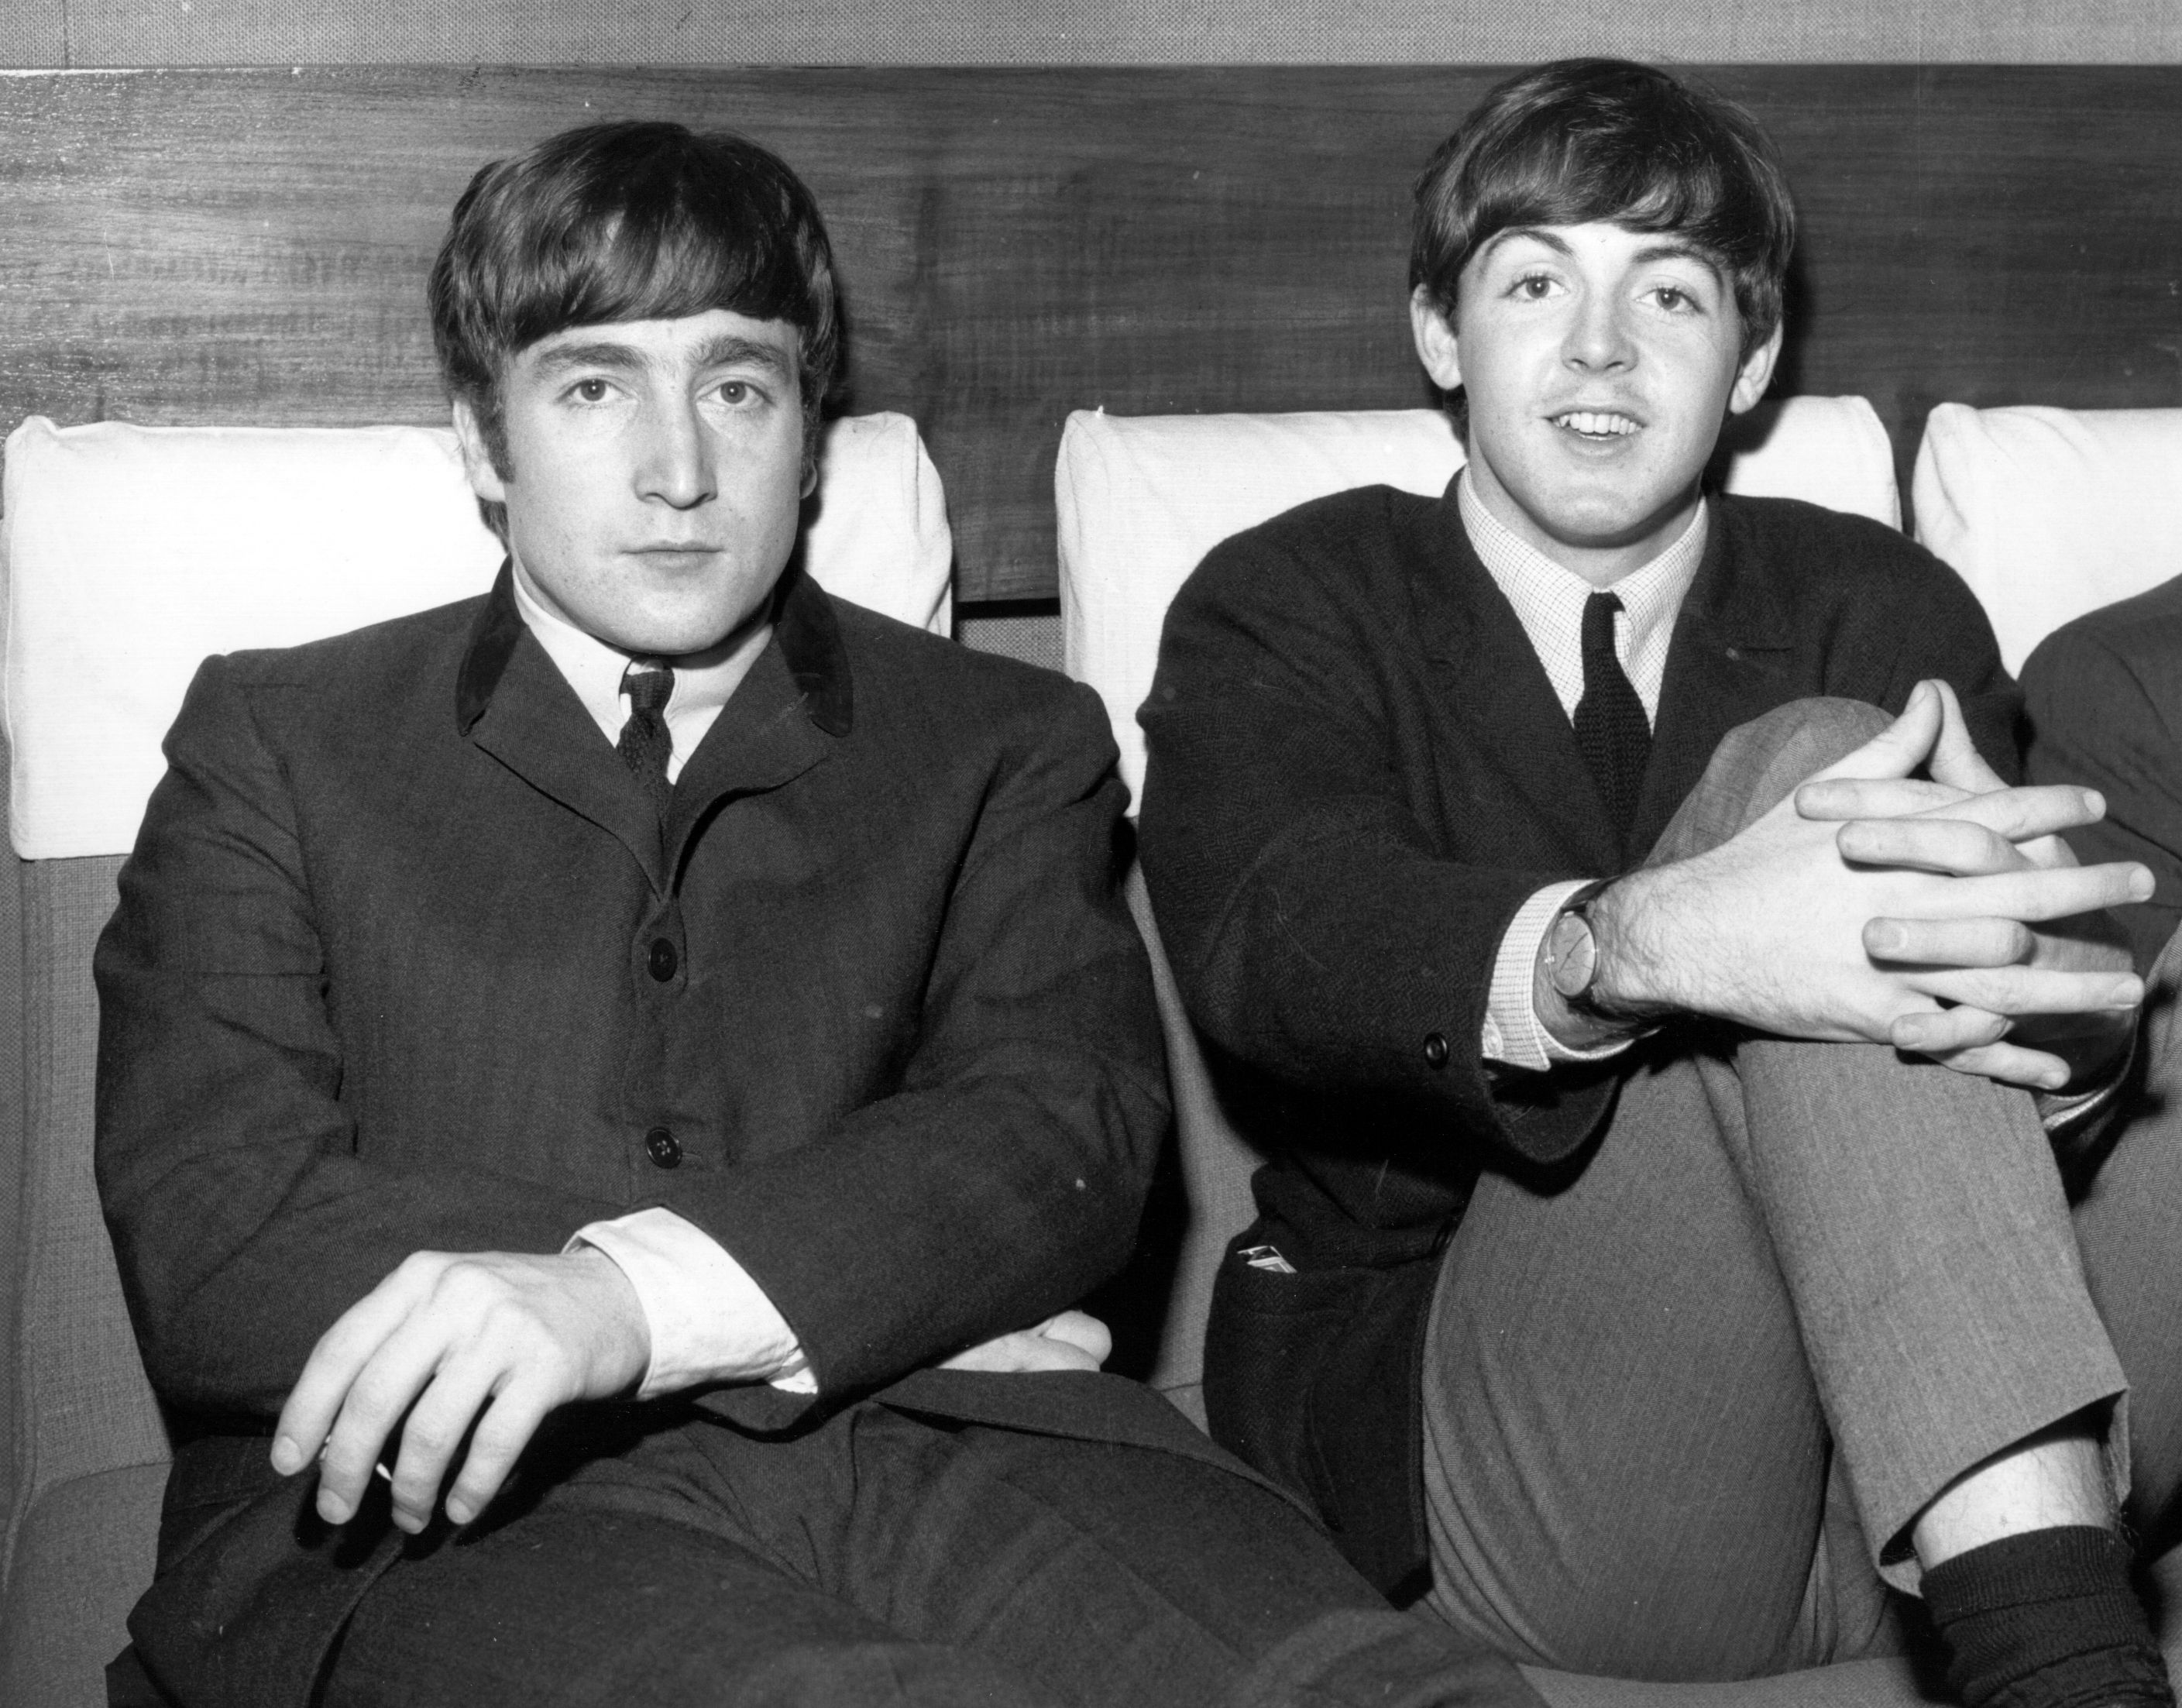 John Lennon and Paul McCartney sitting, photographed in black and white